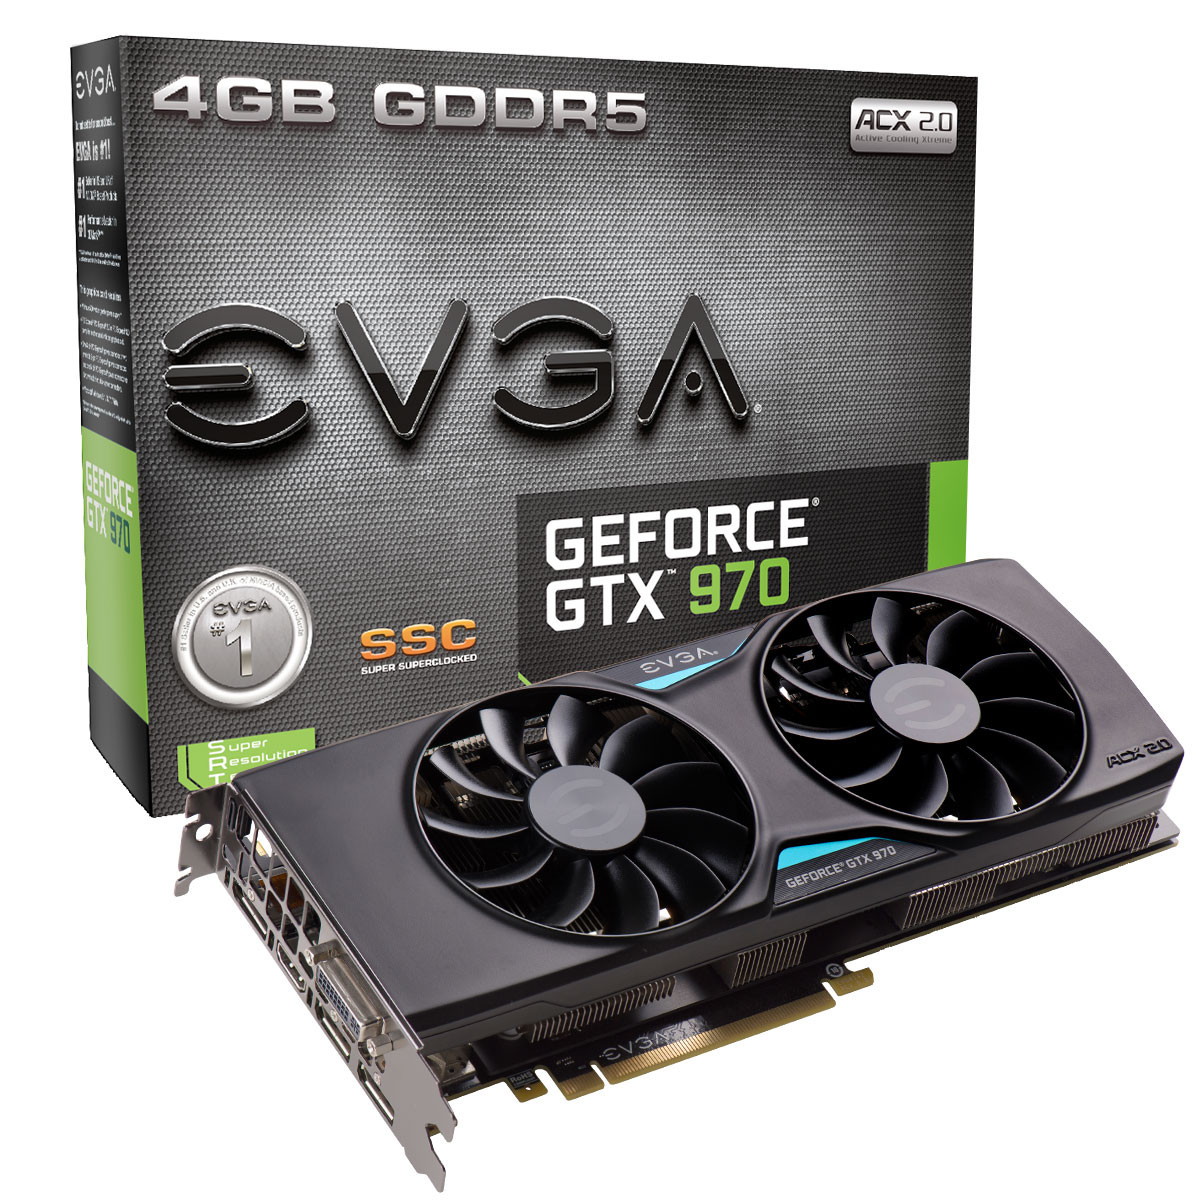 Media asset in full size related to 3dfxzone.it news item entitled as follows: EVGA annuncia la video card GeForce GTX 970 SSC ACX 2.0 | Image Name: news22085_EVGA-GeForce-GTX-970-SSC_3.jpg